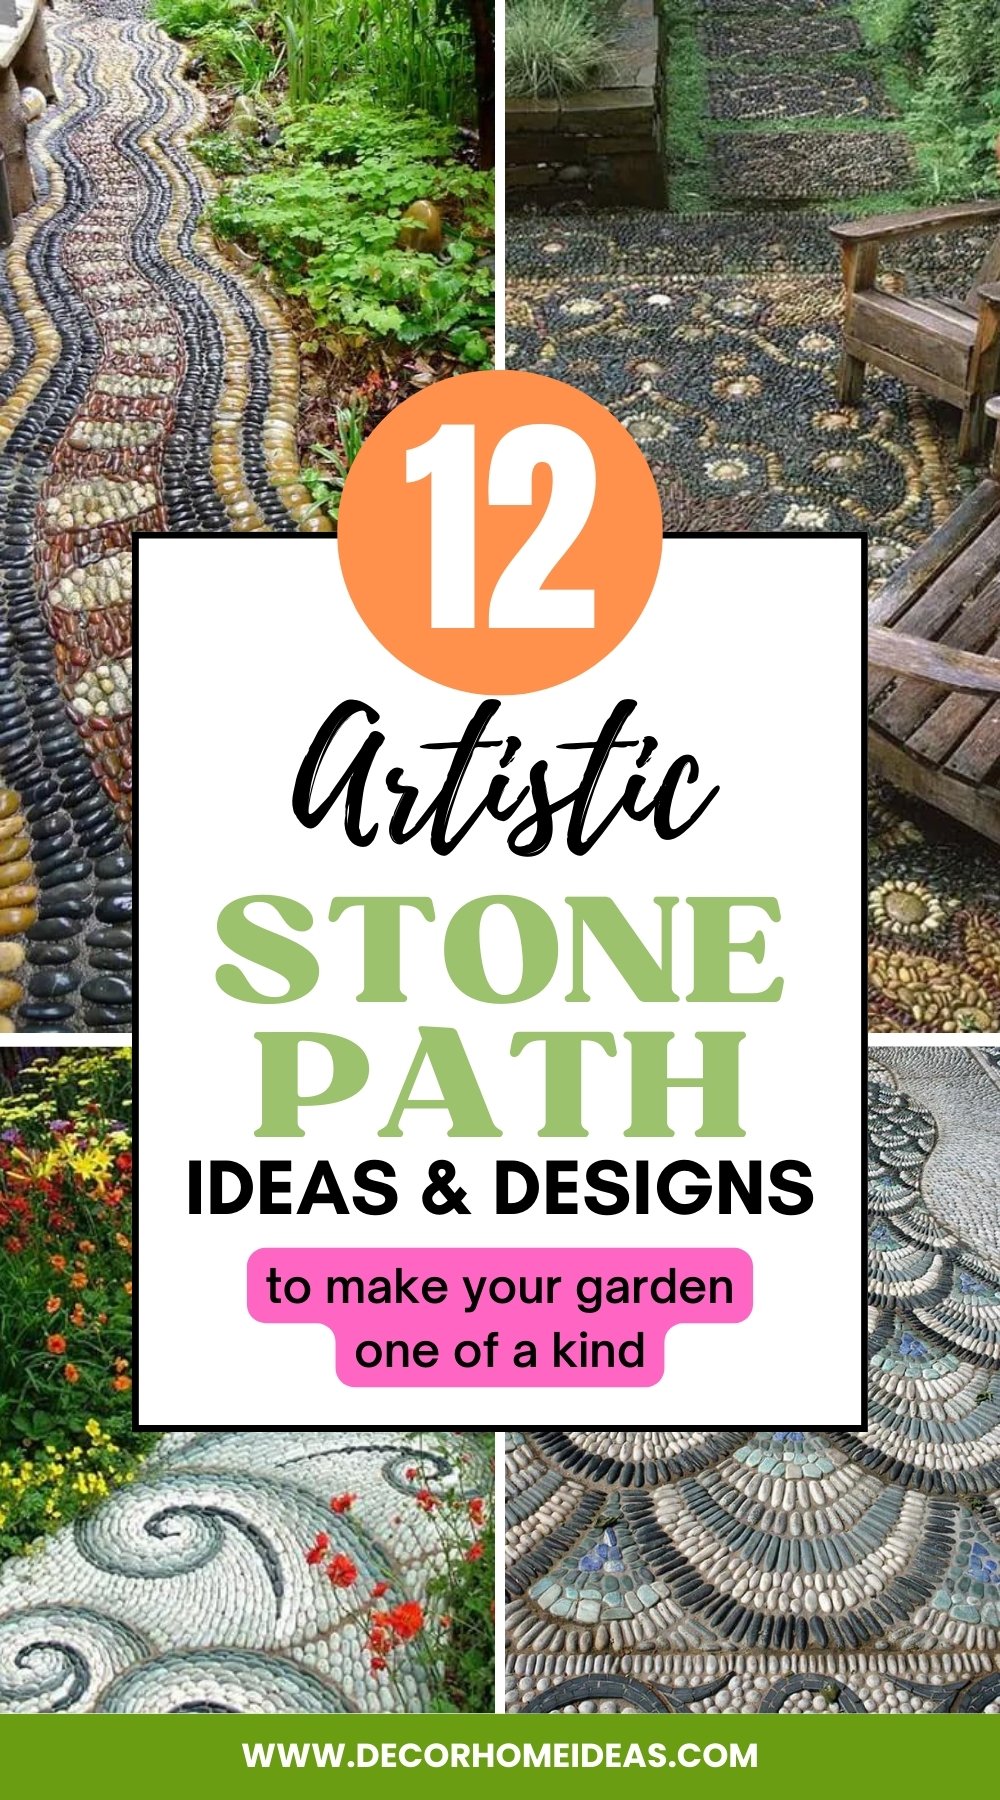 Get creative with your garden path! Check out our 12 artistic stone path ideas to give your garden an impressive look.